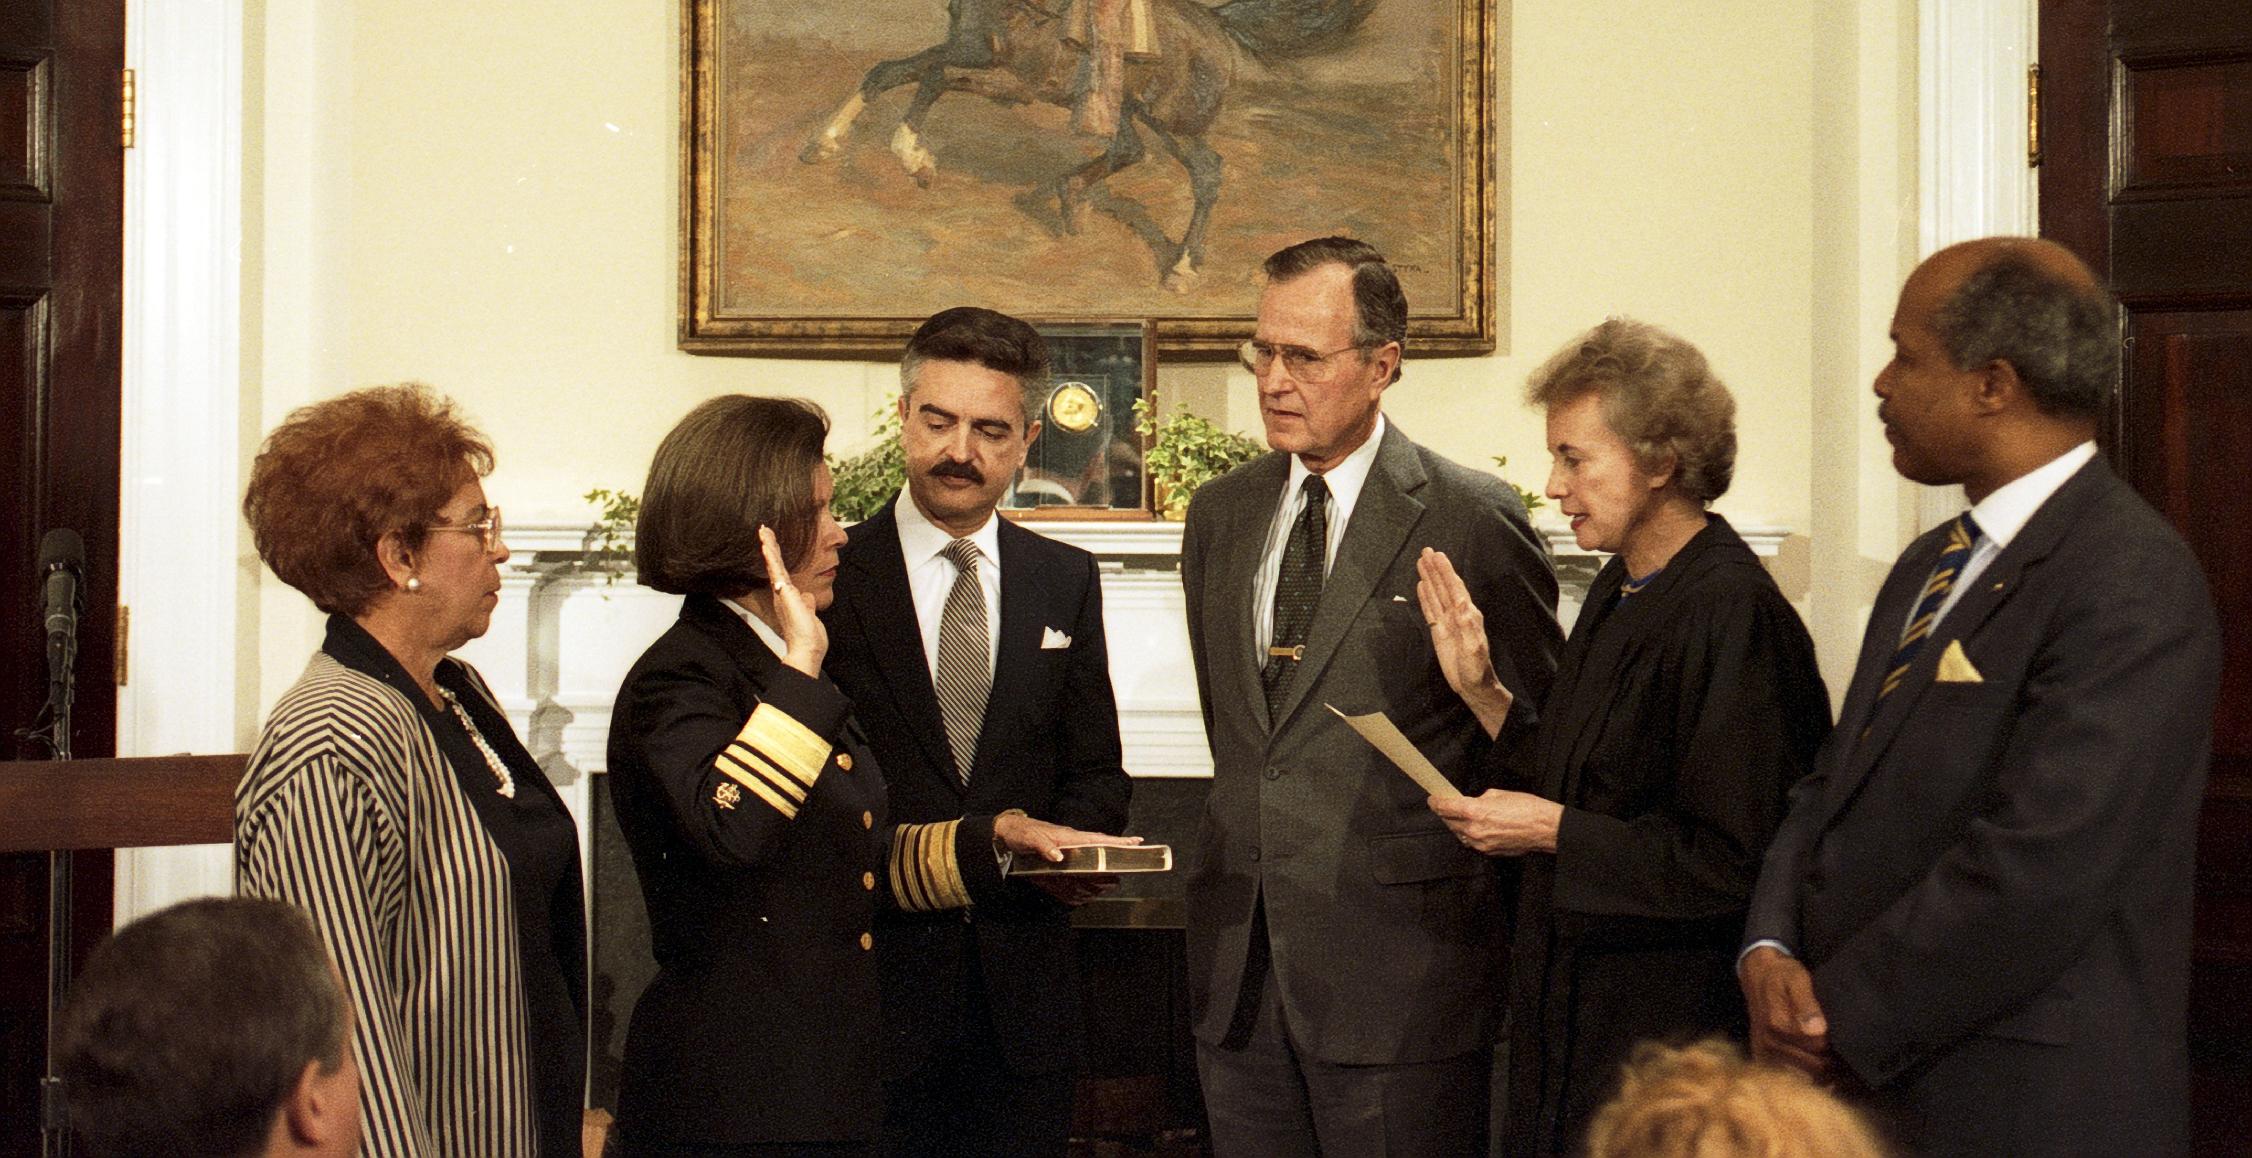 Swearing-in ceremony for first female Surgeon General Antonia Novello